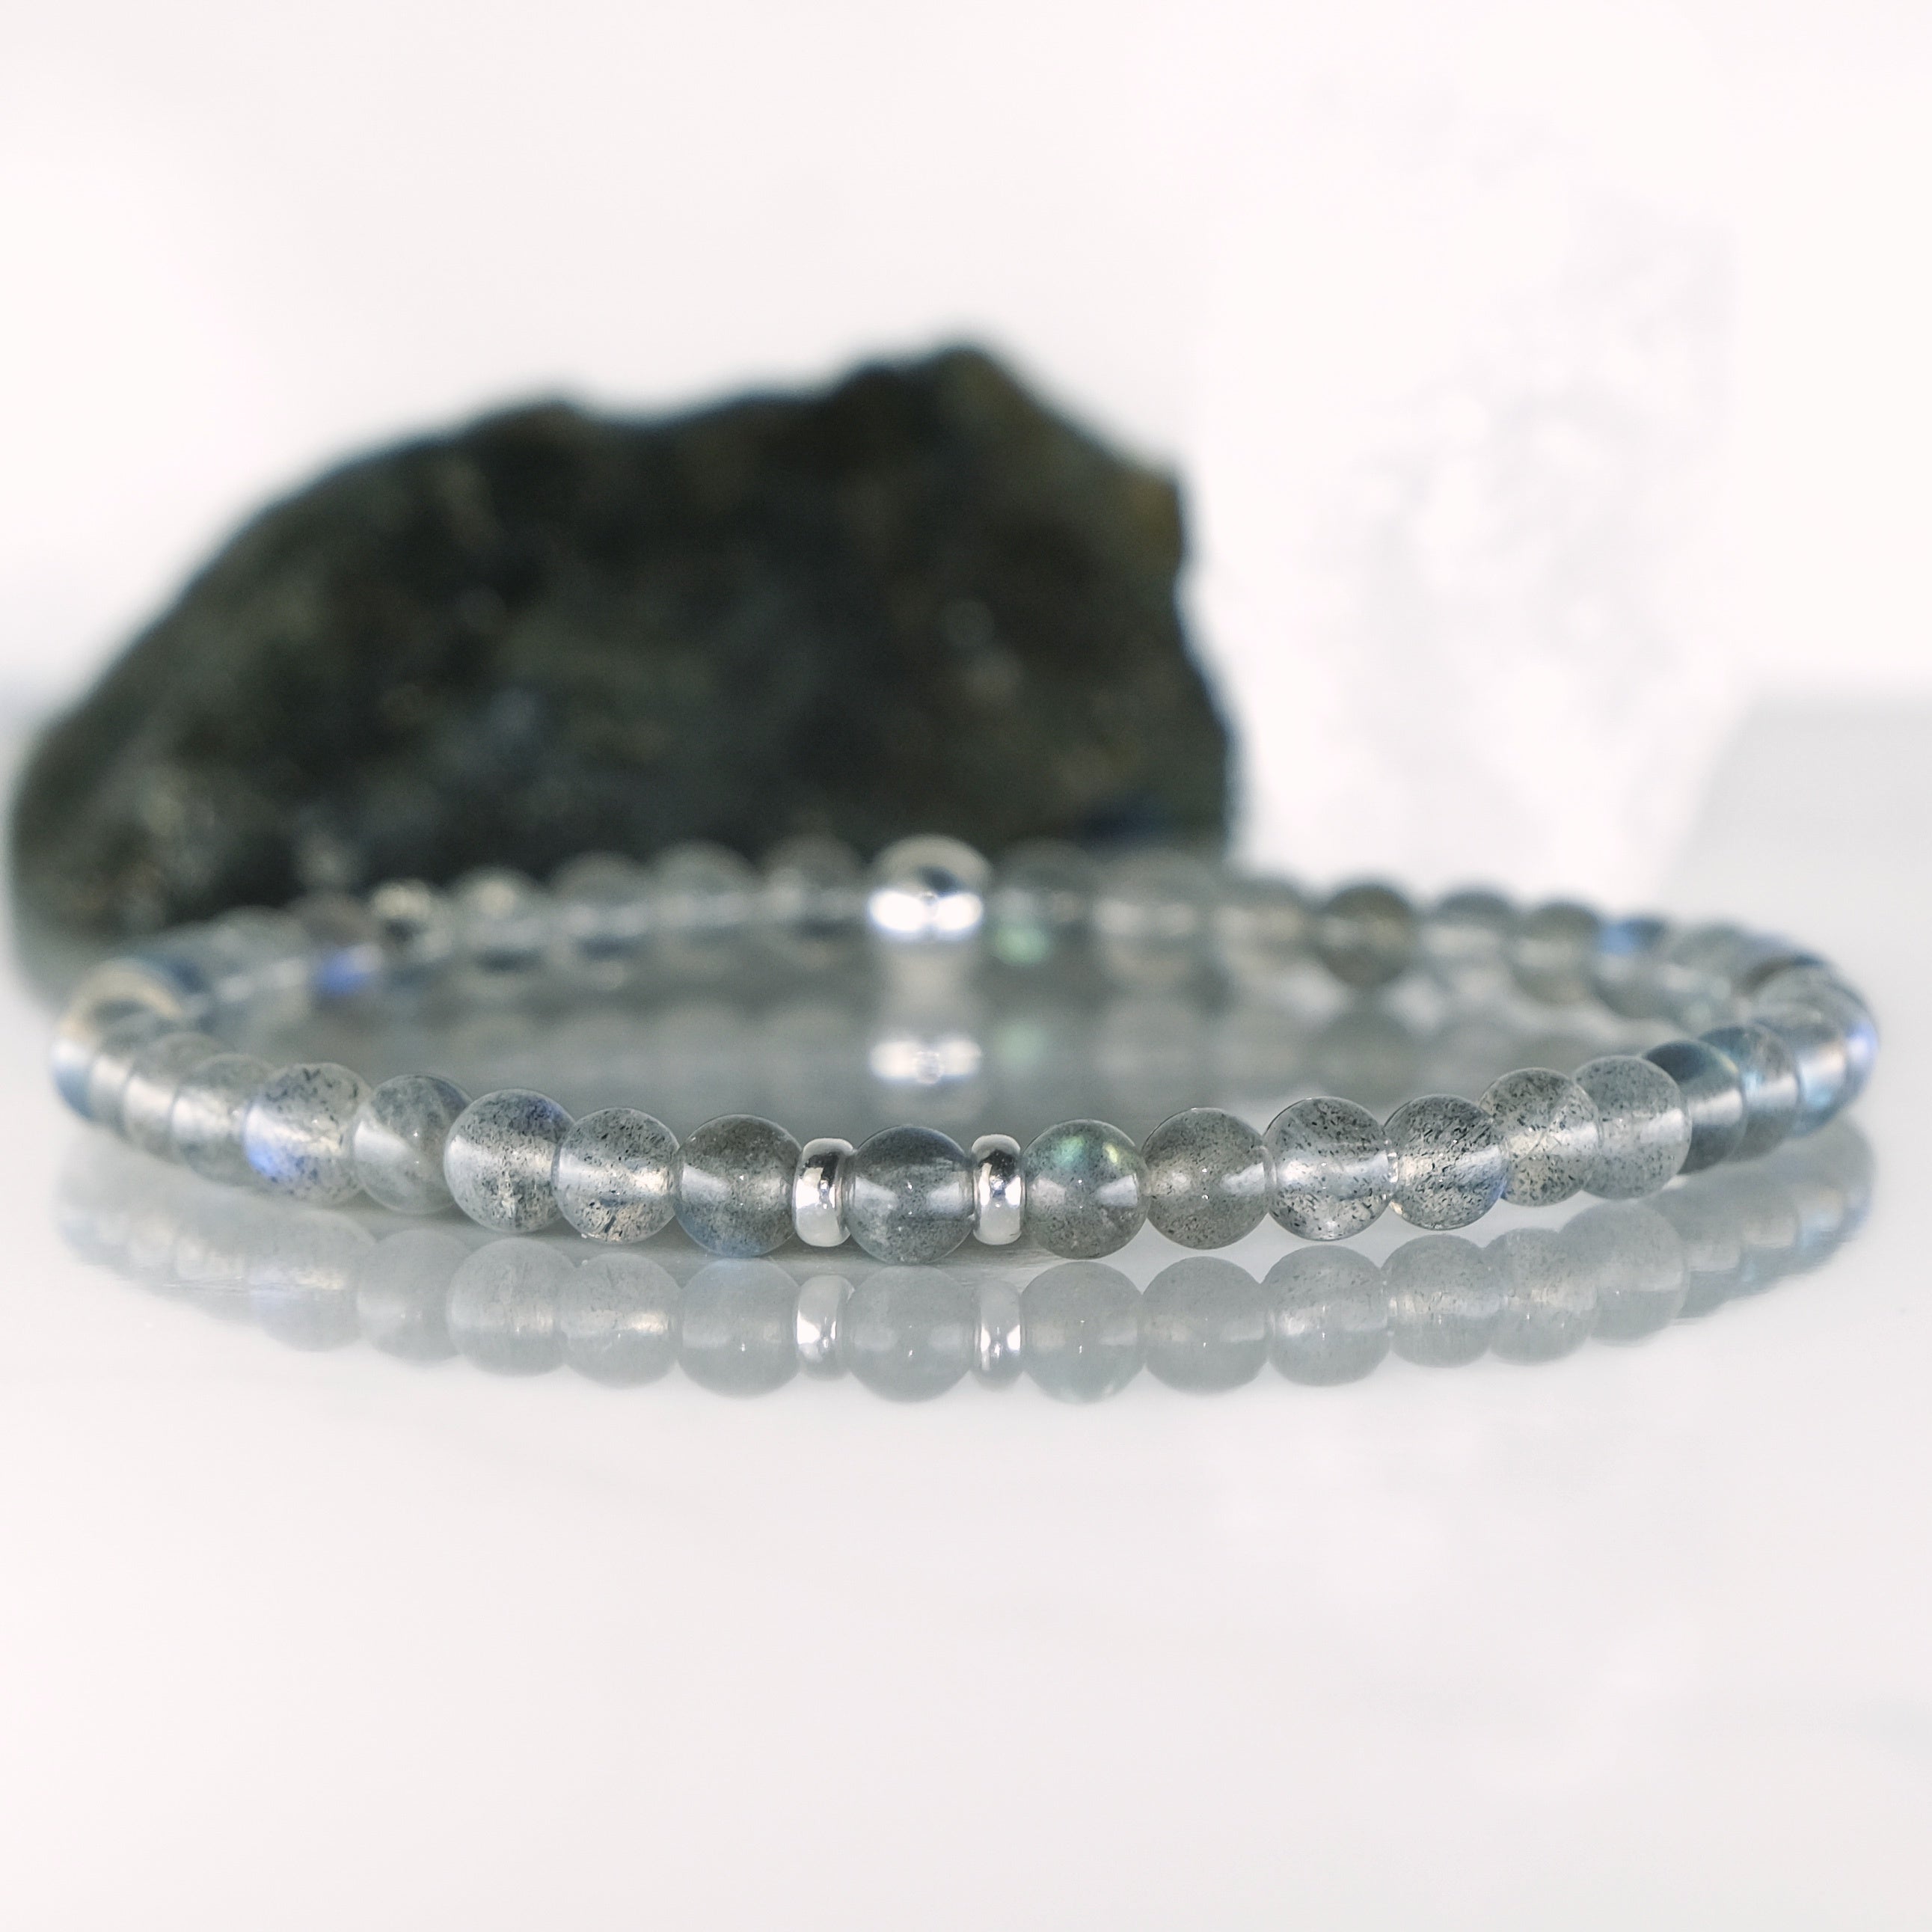 4mm labradorite bracelet with 925 silver accents